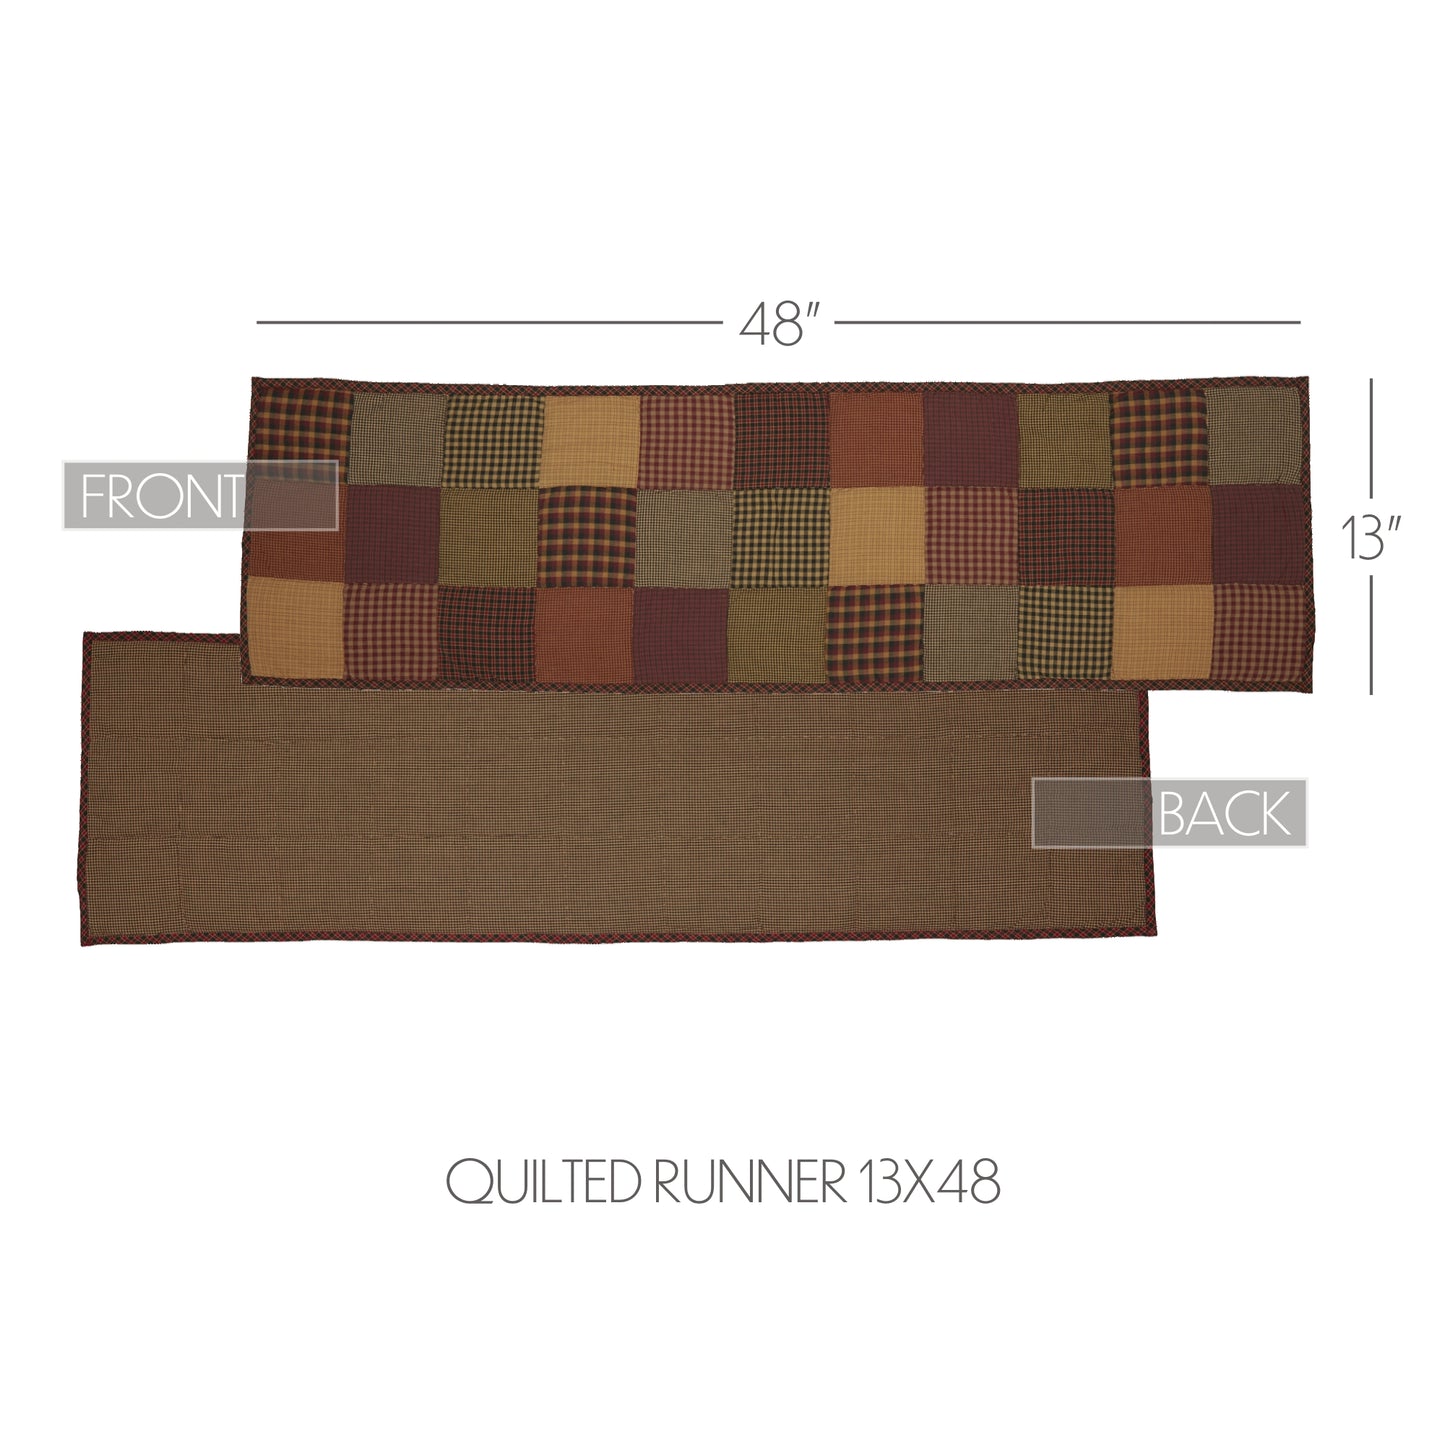 56701-Heritage-Farms-Quilted-Runner-13x48-image-1